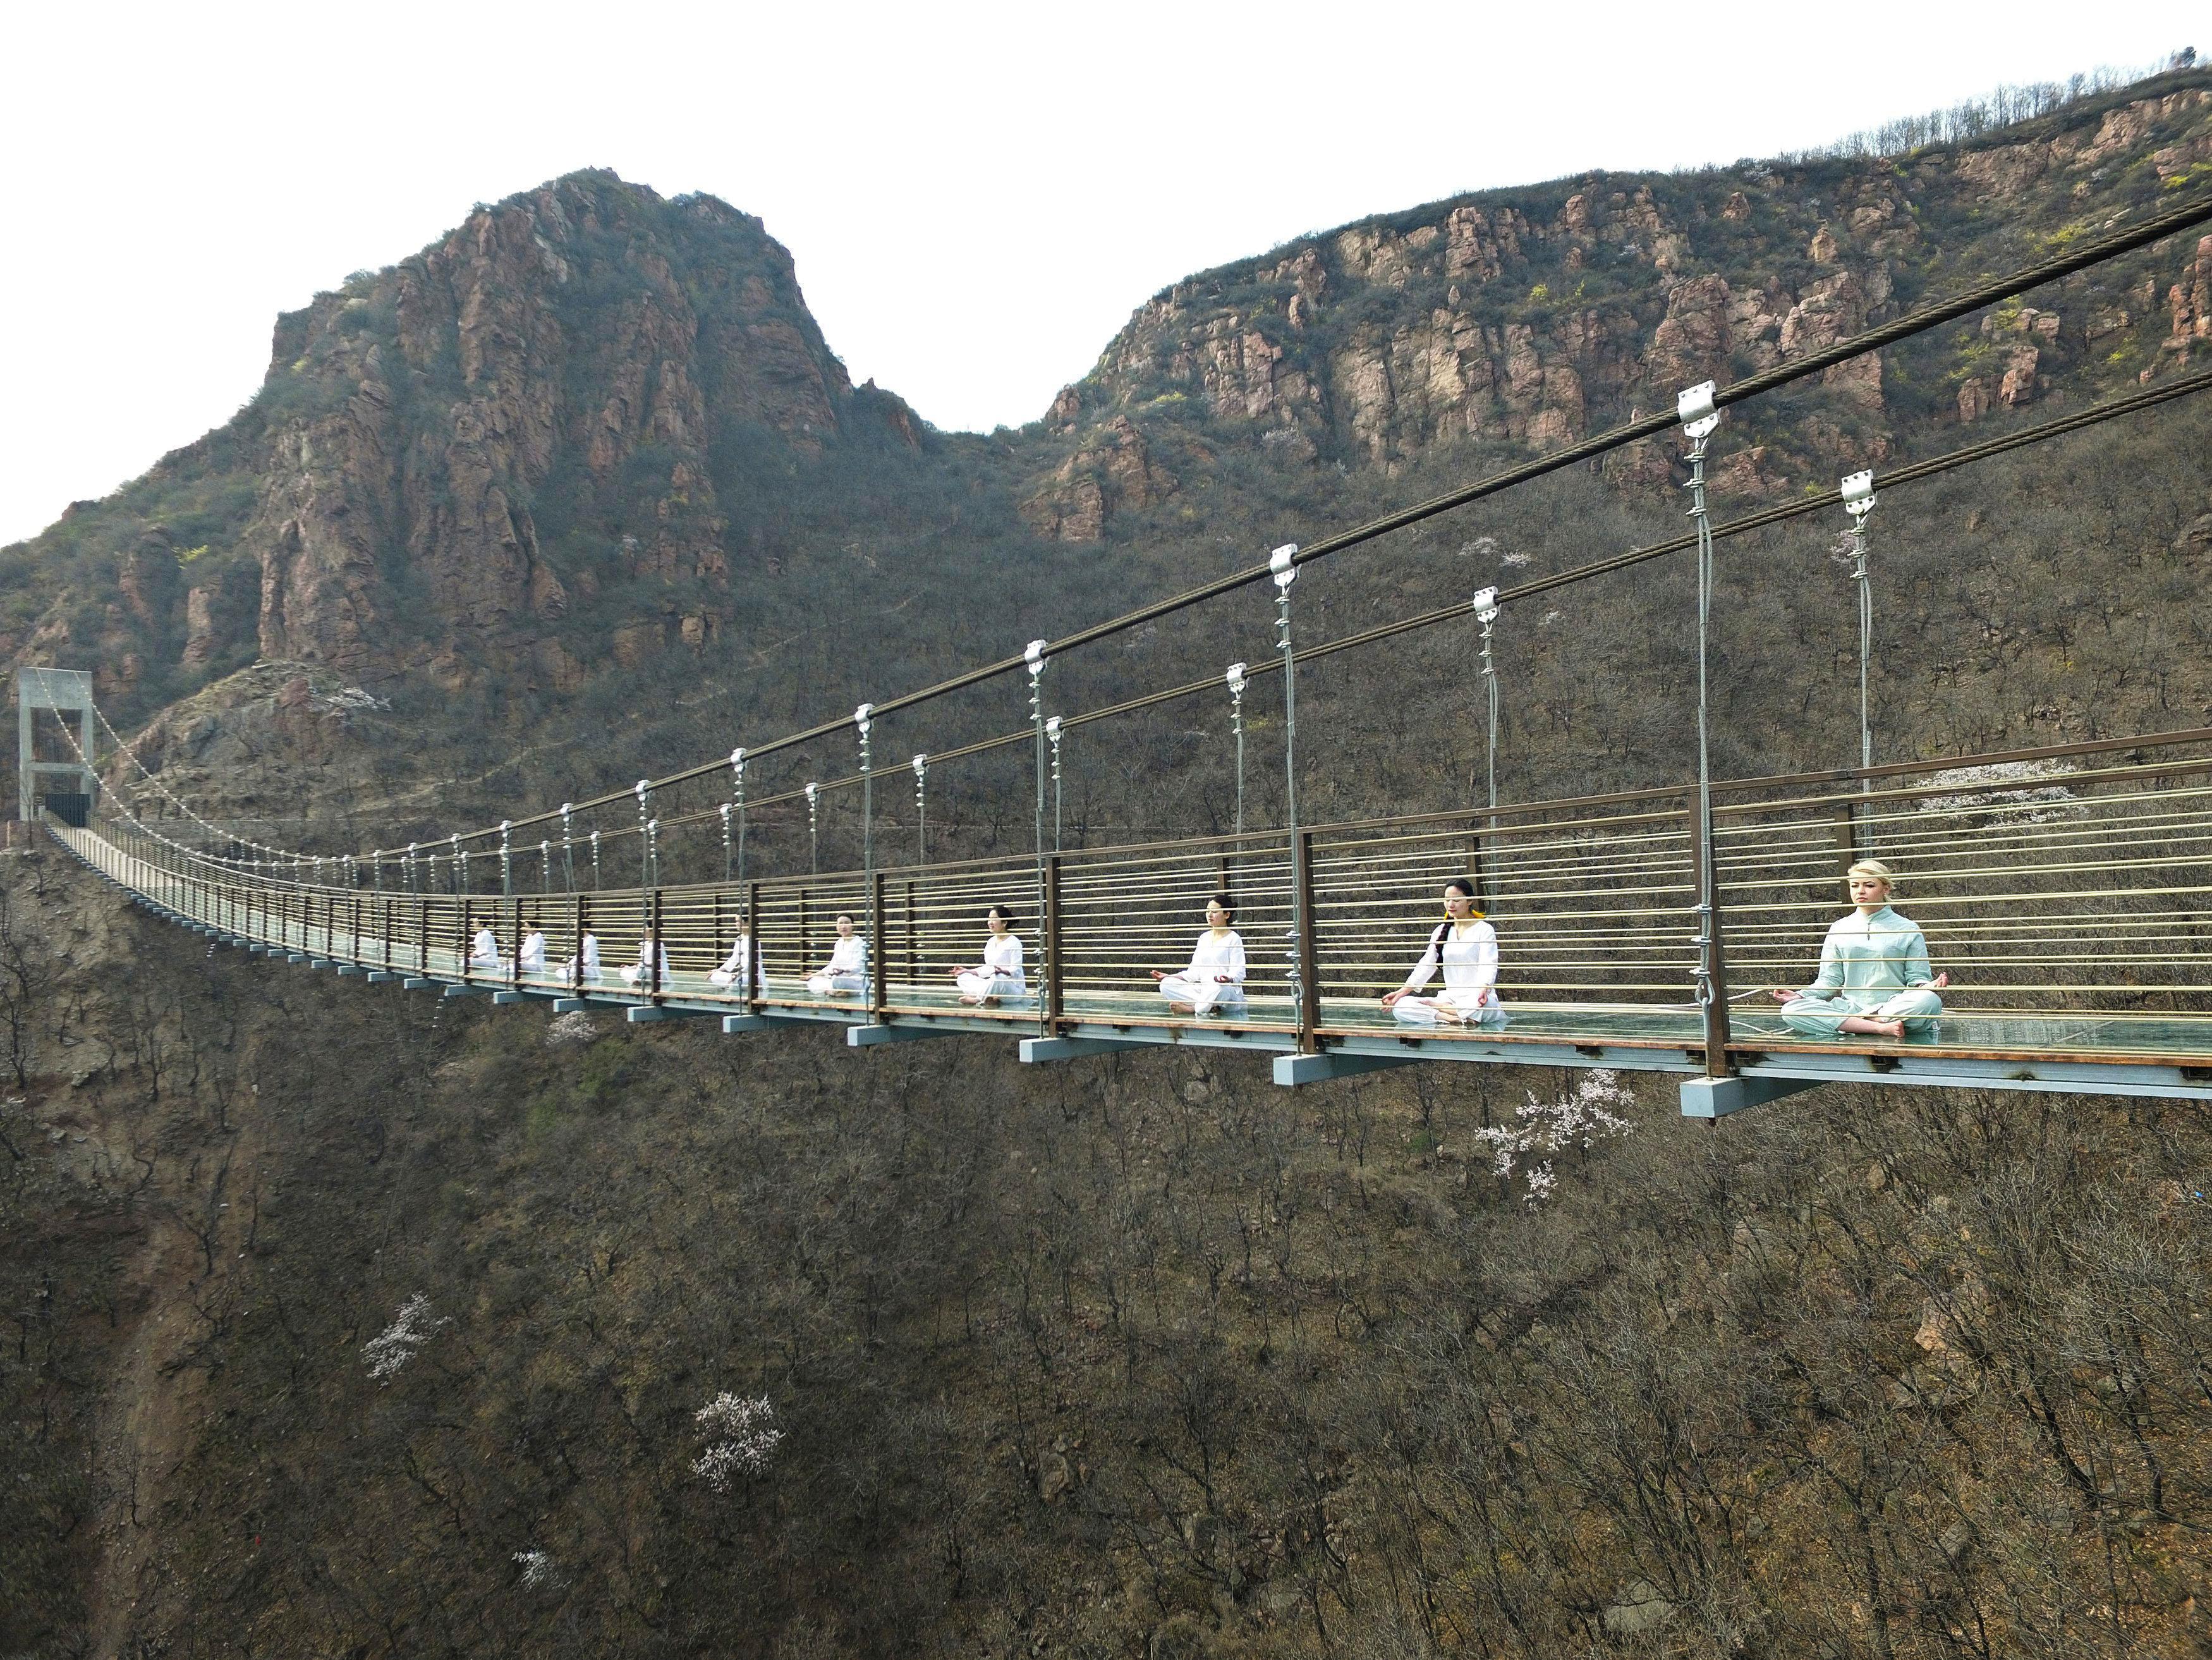 Women perform yoga on a glass suspension bridge as a way to attract tourists in Fuxishan